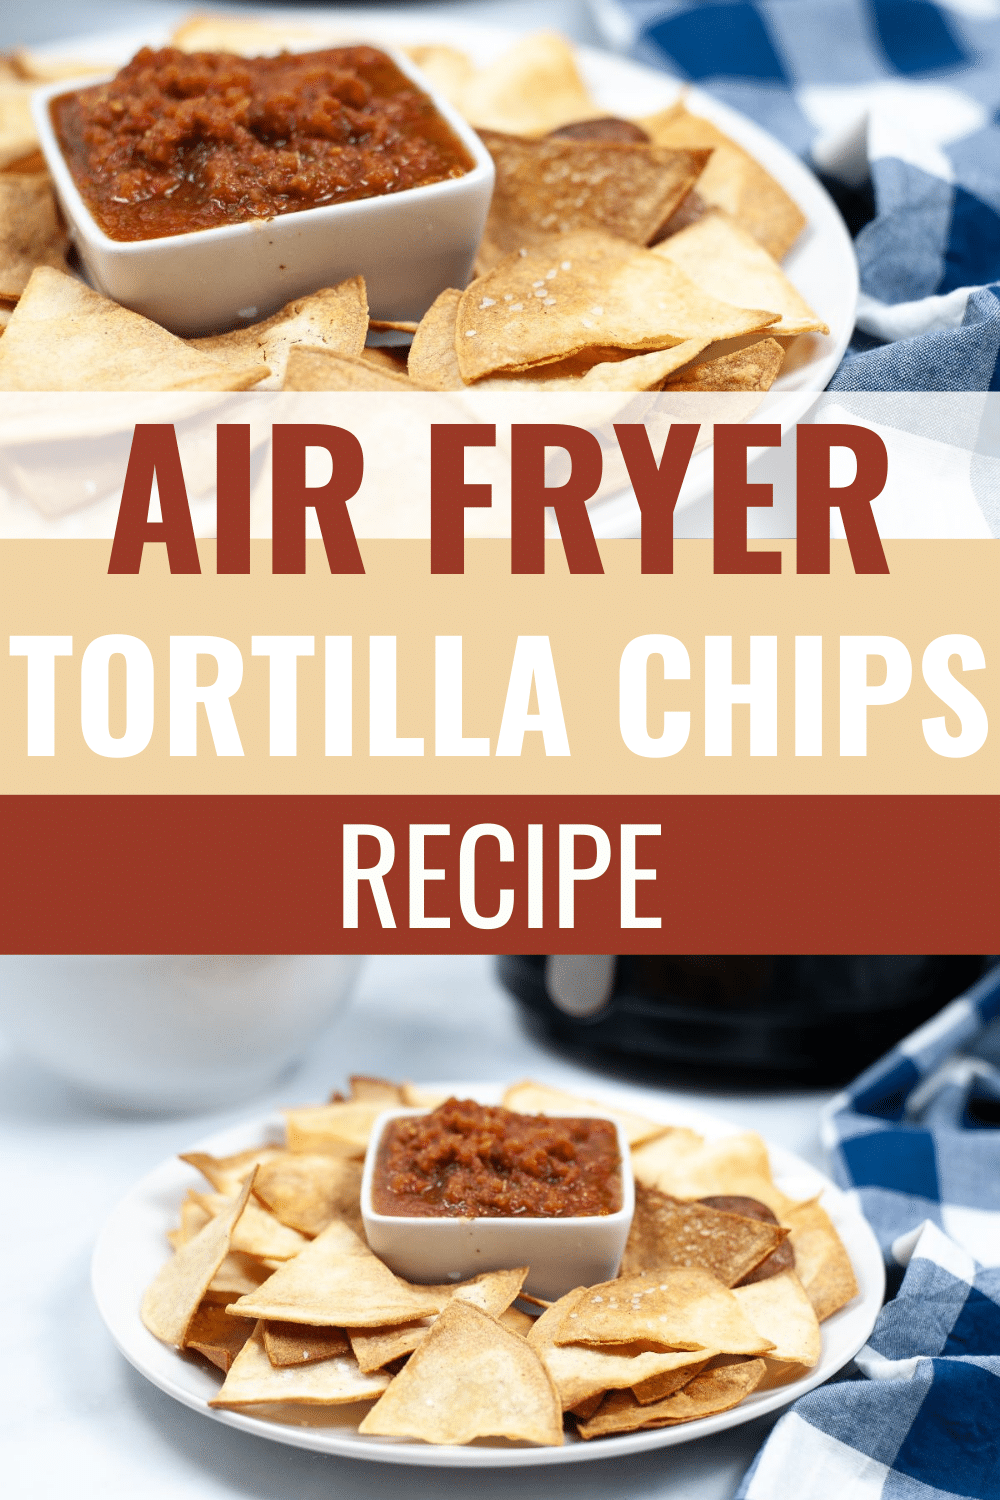 This Air Fryer Tortilla Chips recipe is an easy way to make crispy, crunchy tortilla chips without frying in oil. You won't buy chips again! #airfryer #tortillachips #chips #recipe via @wondermomwannab